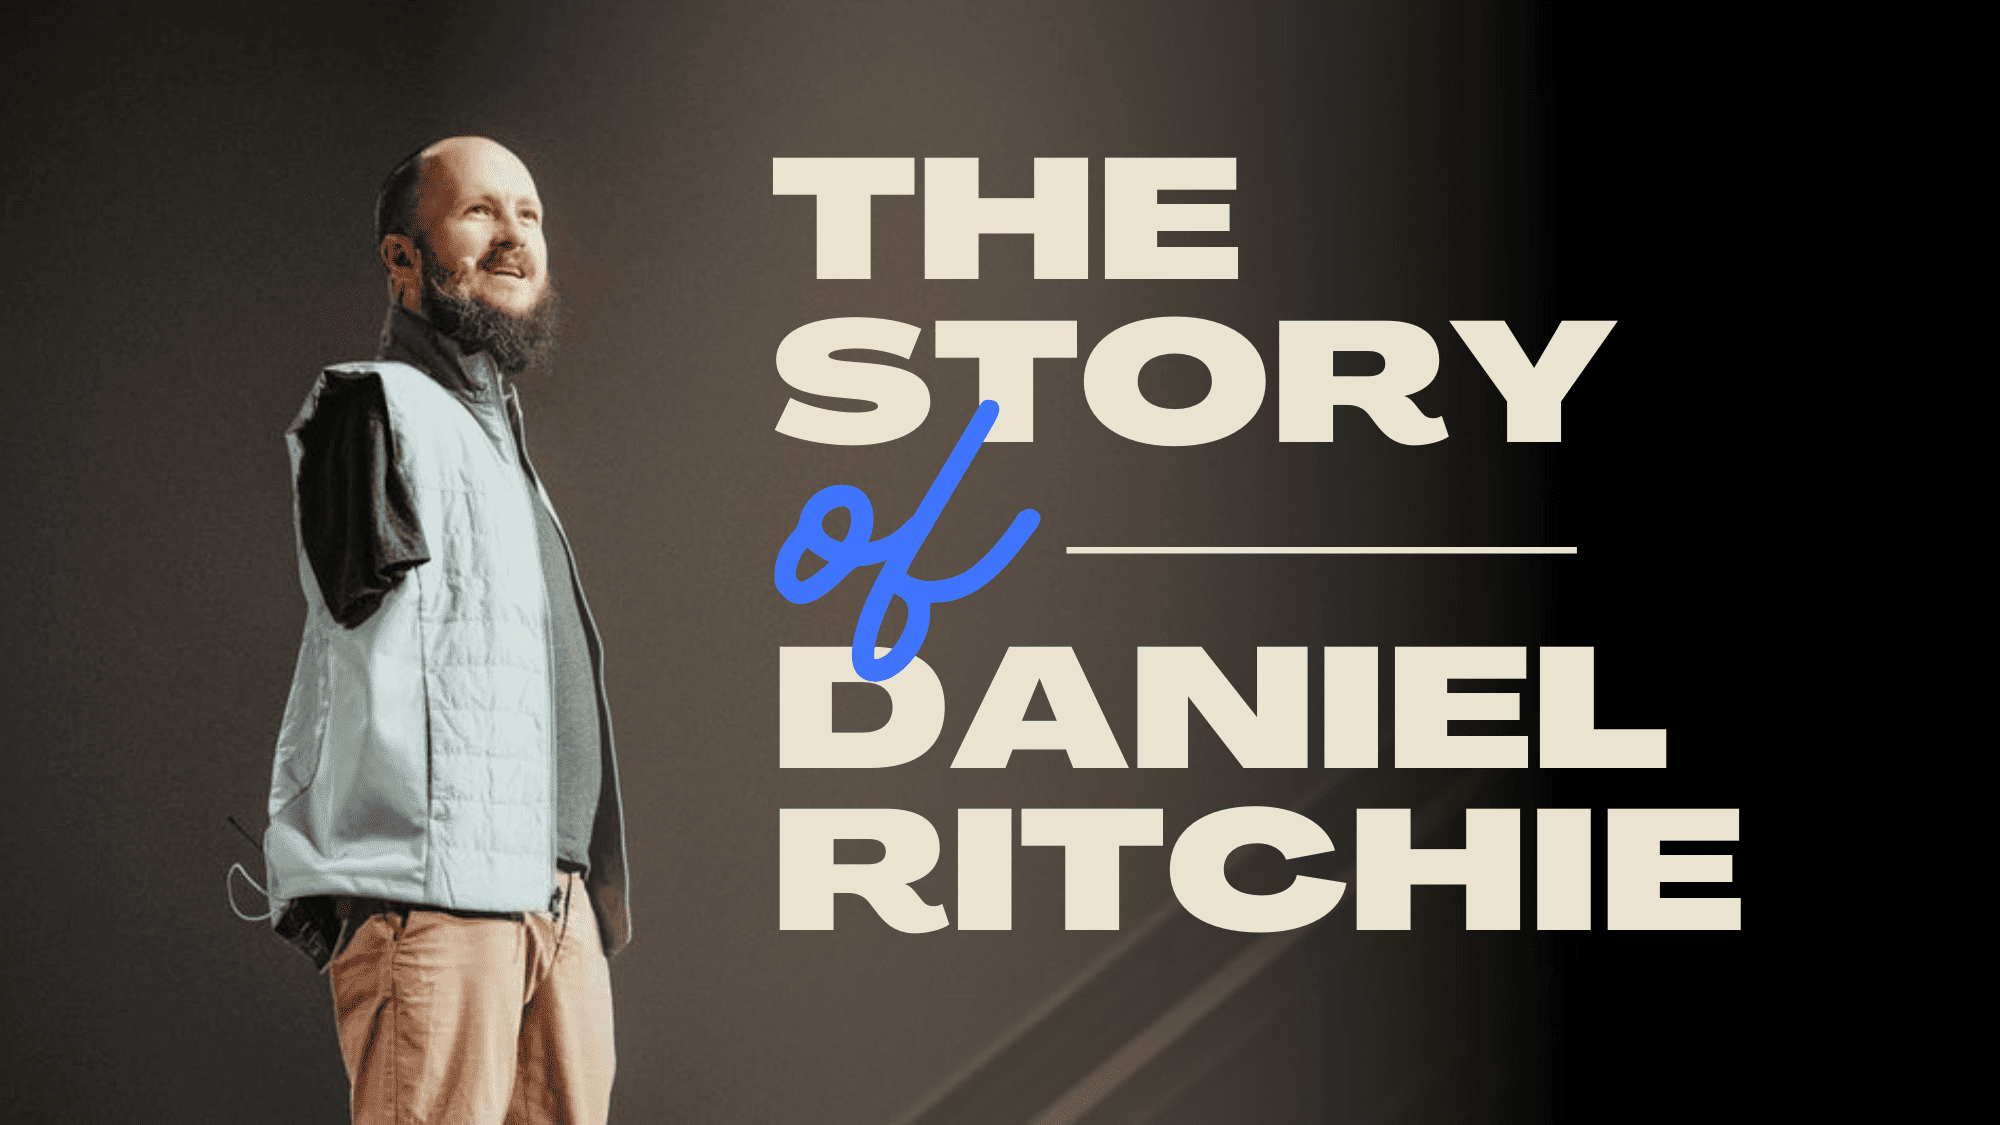 Image of a man Daniel Ritchie with no arms speaking about his story